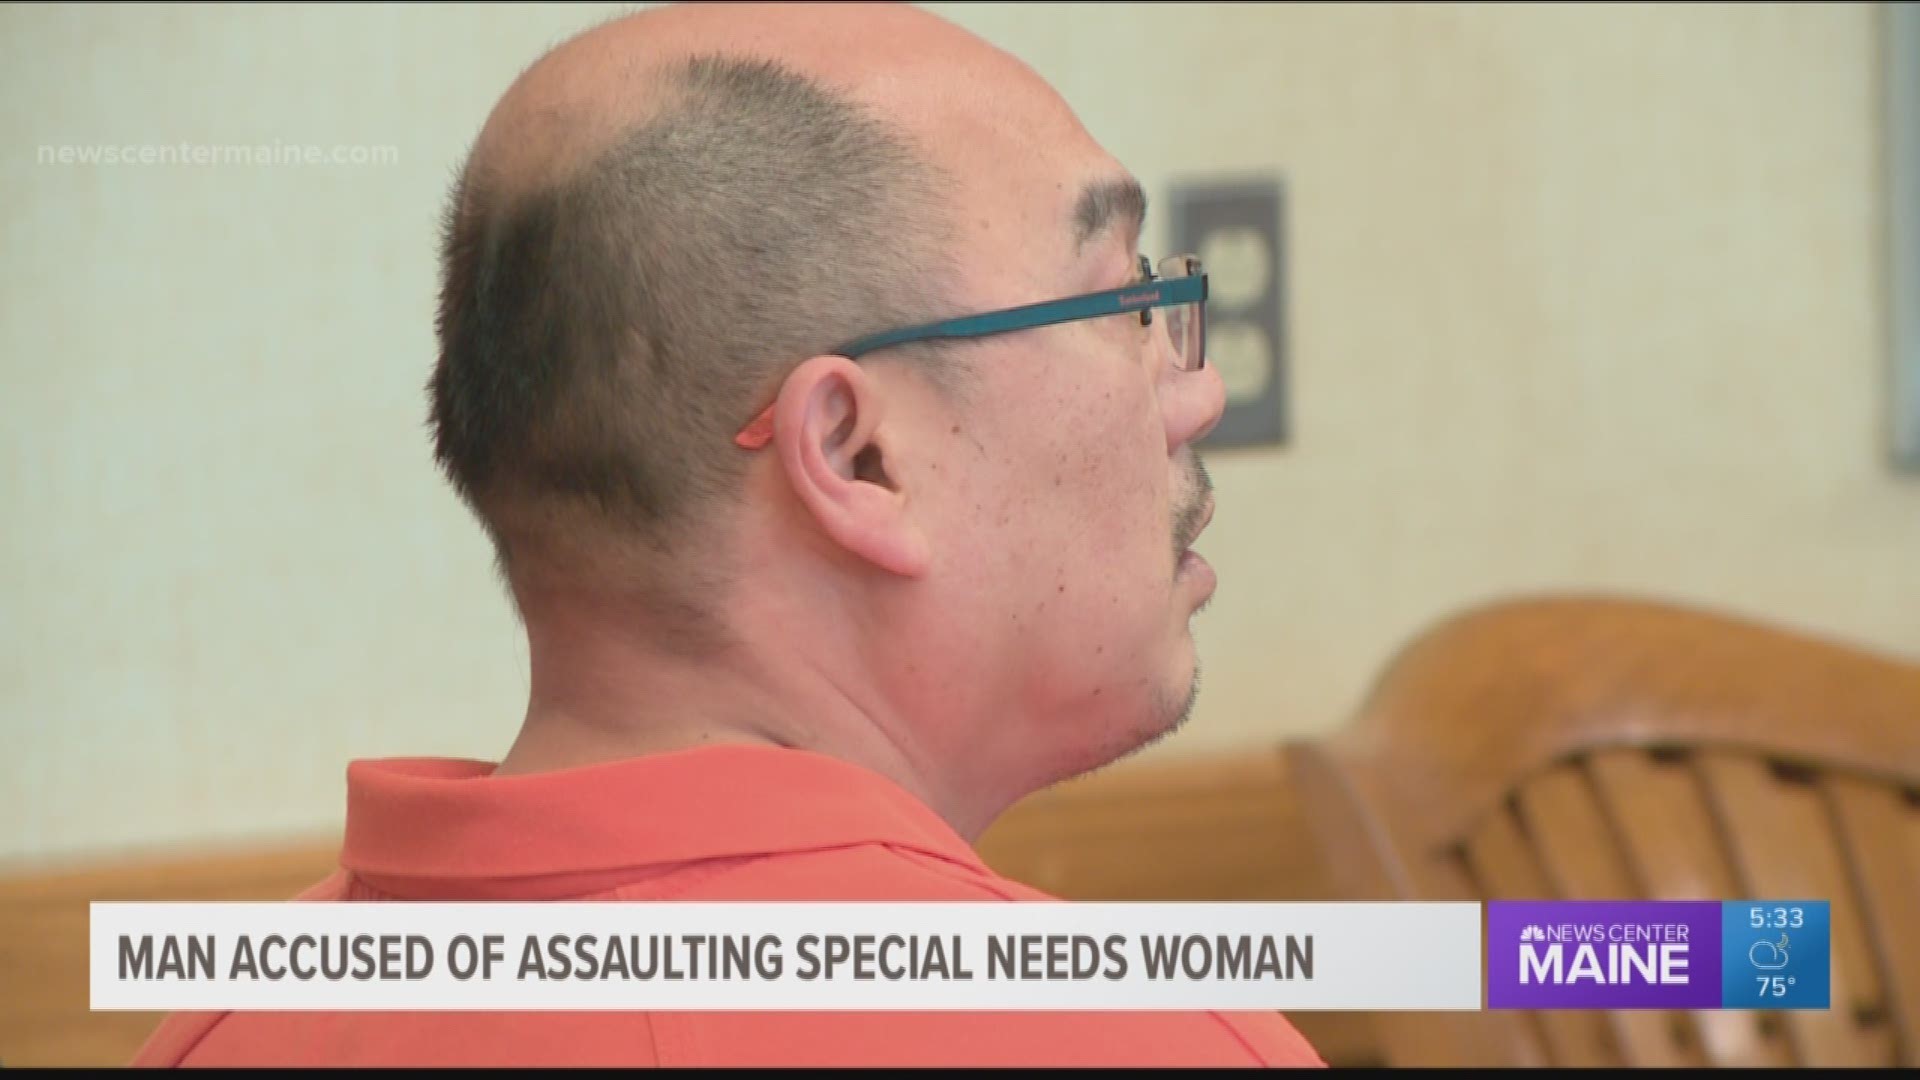 Man accused of assaulting special needs woman